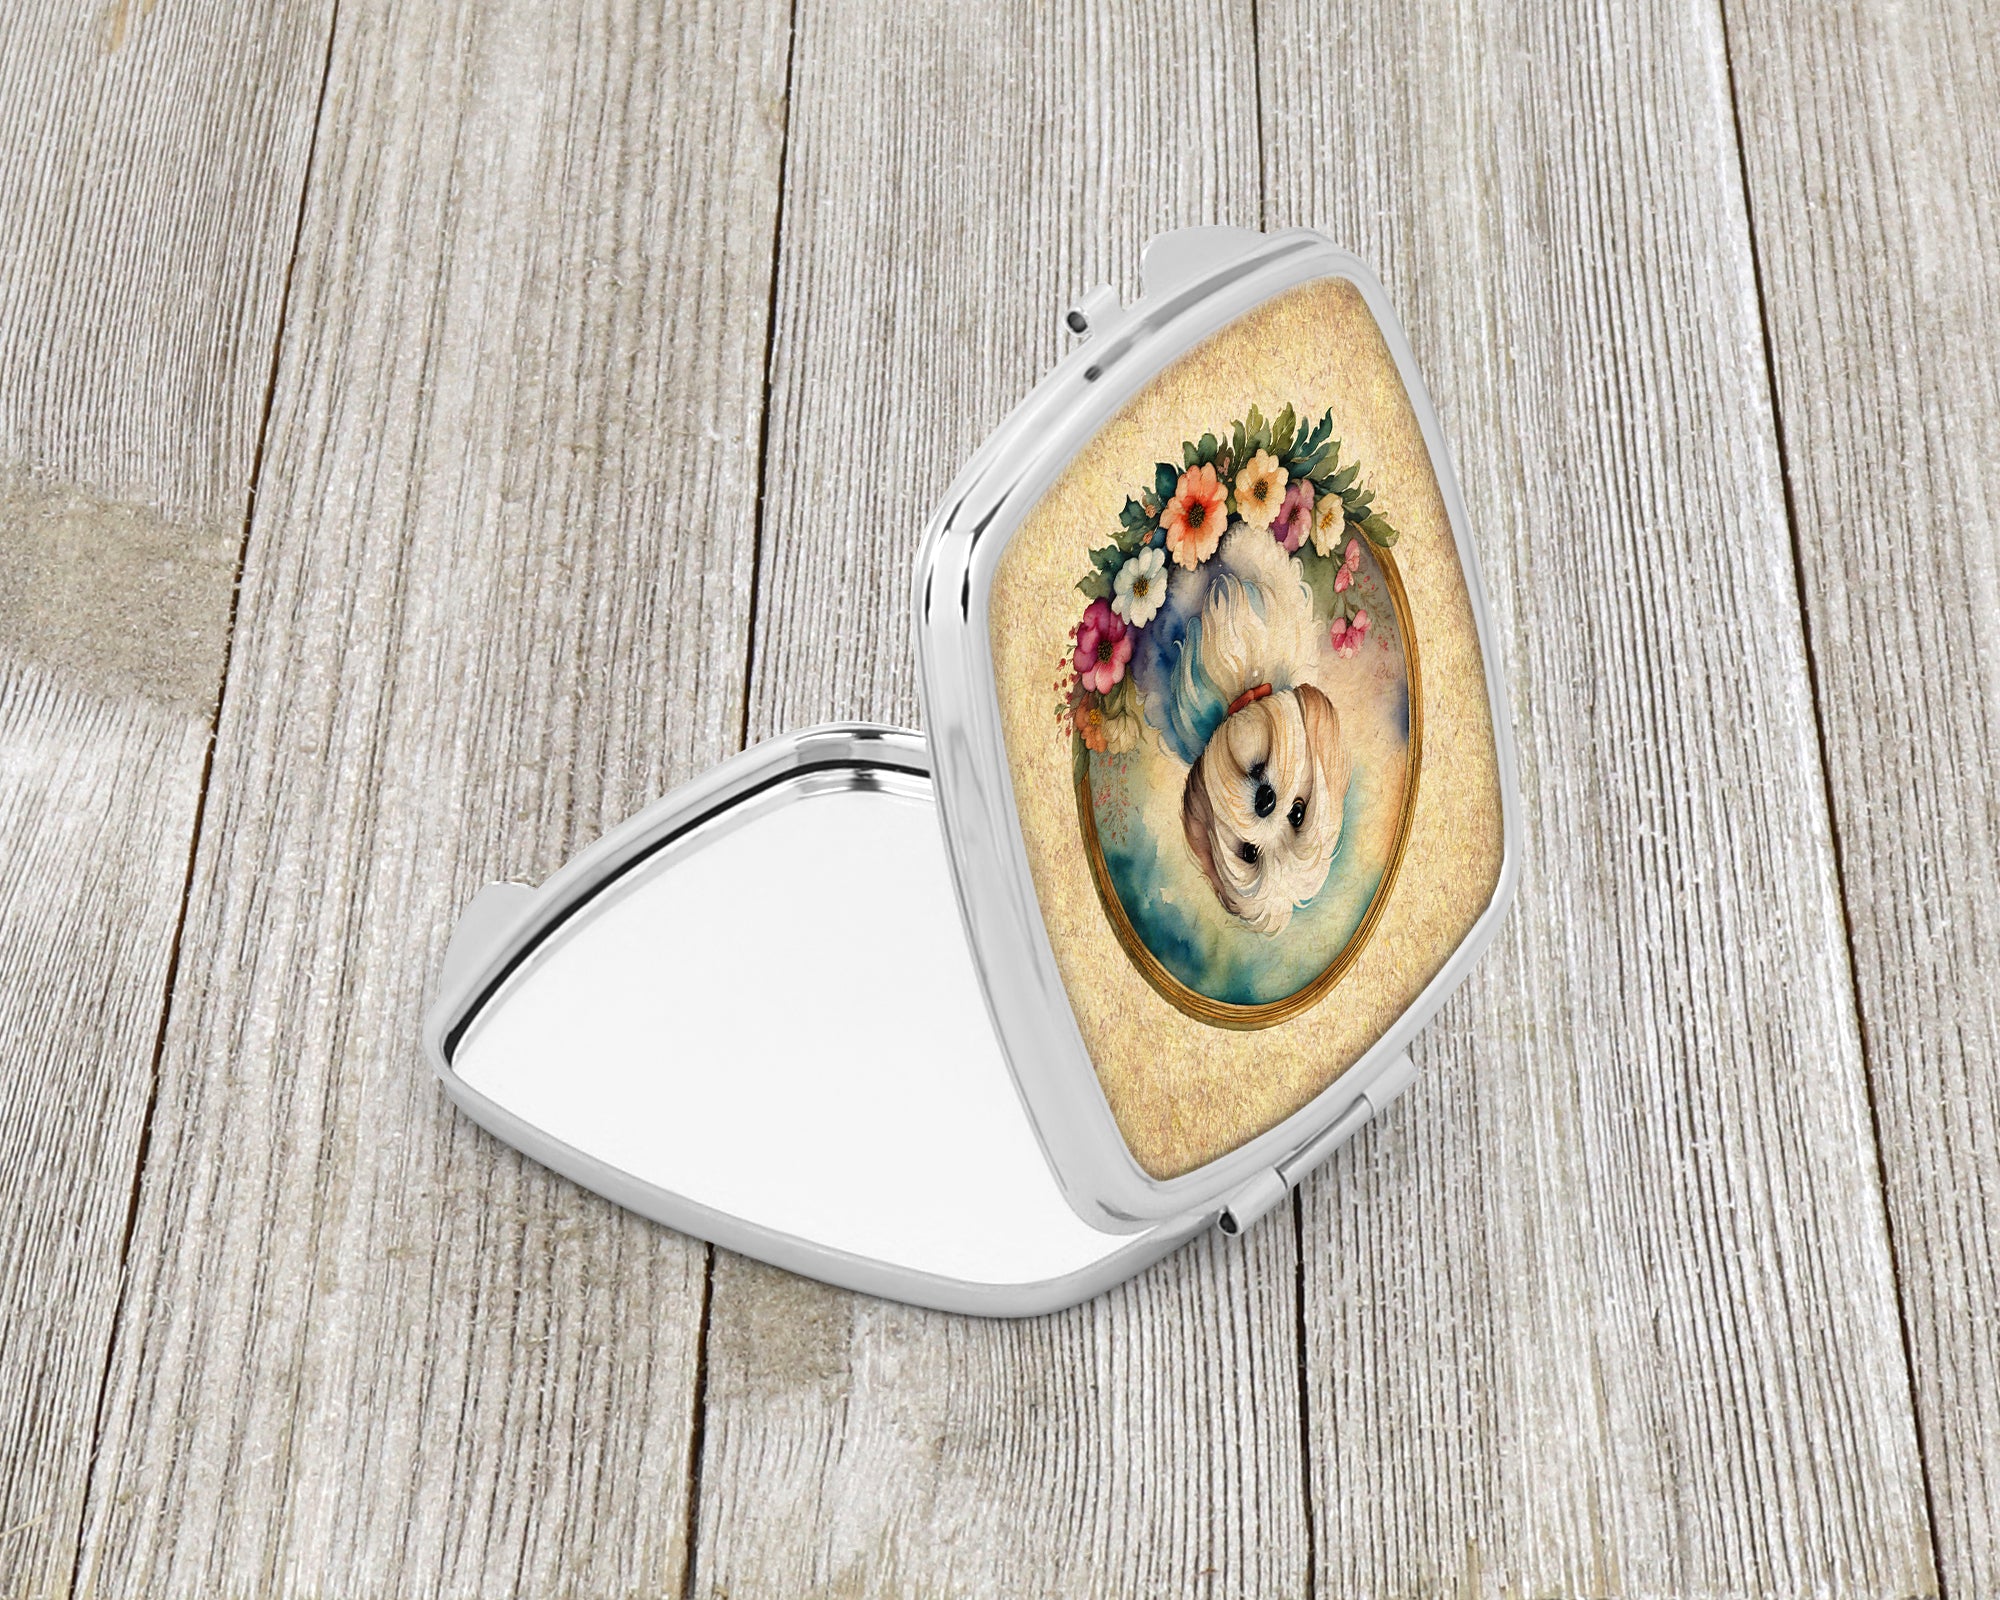 Coton De Tulear and Flowers Compact Mirror